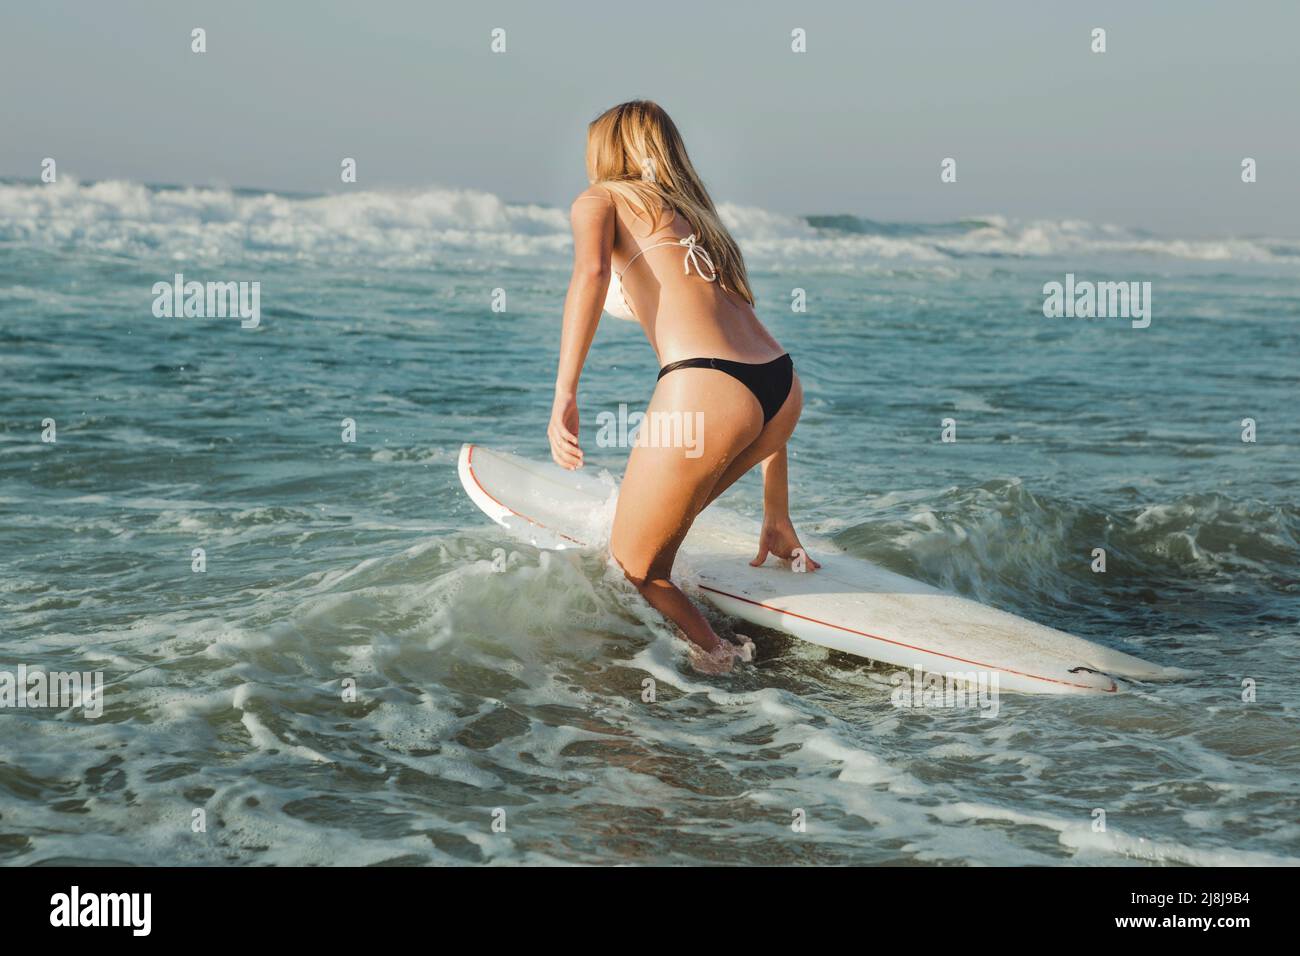 Beautiful woman on the beach going to surf Stock Photo